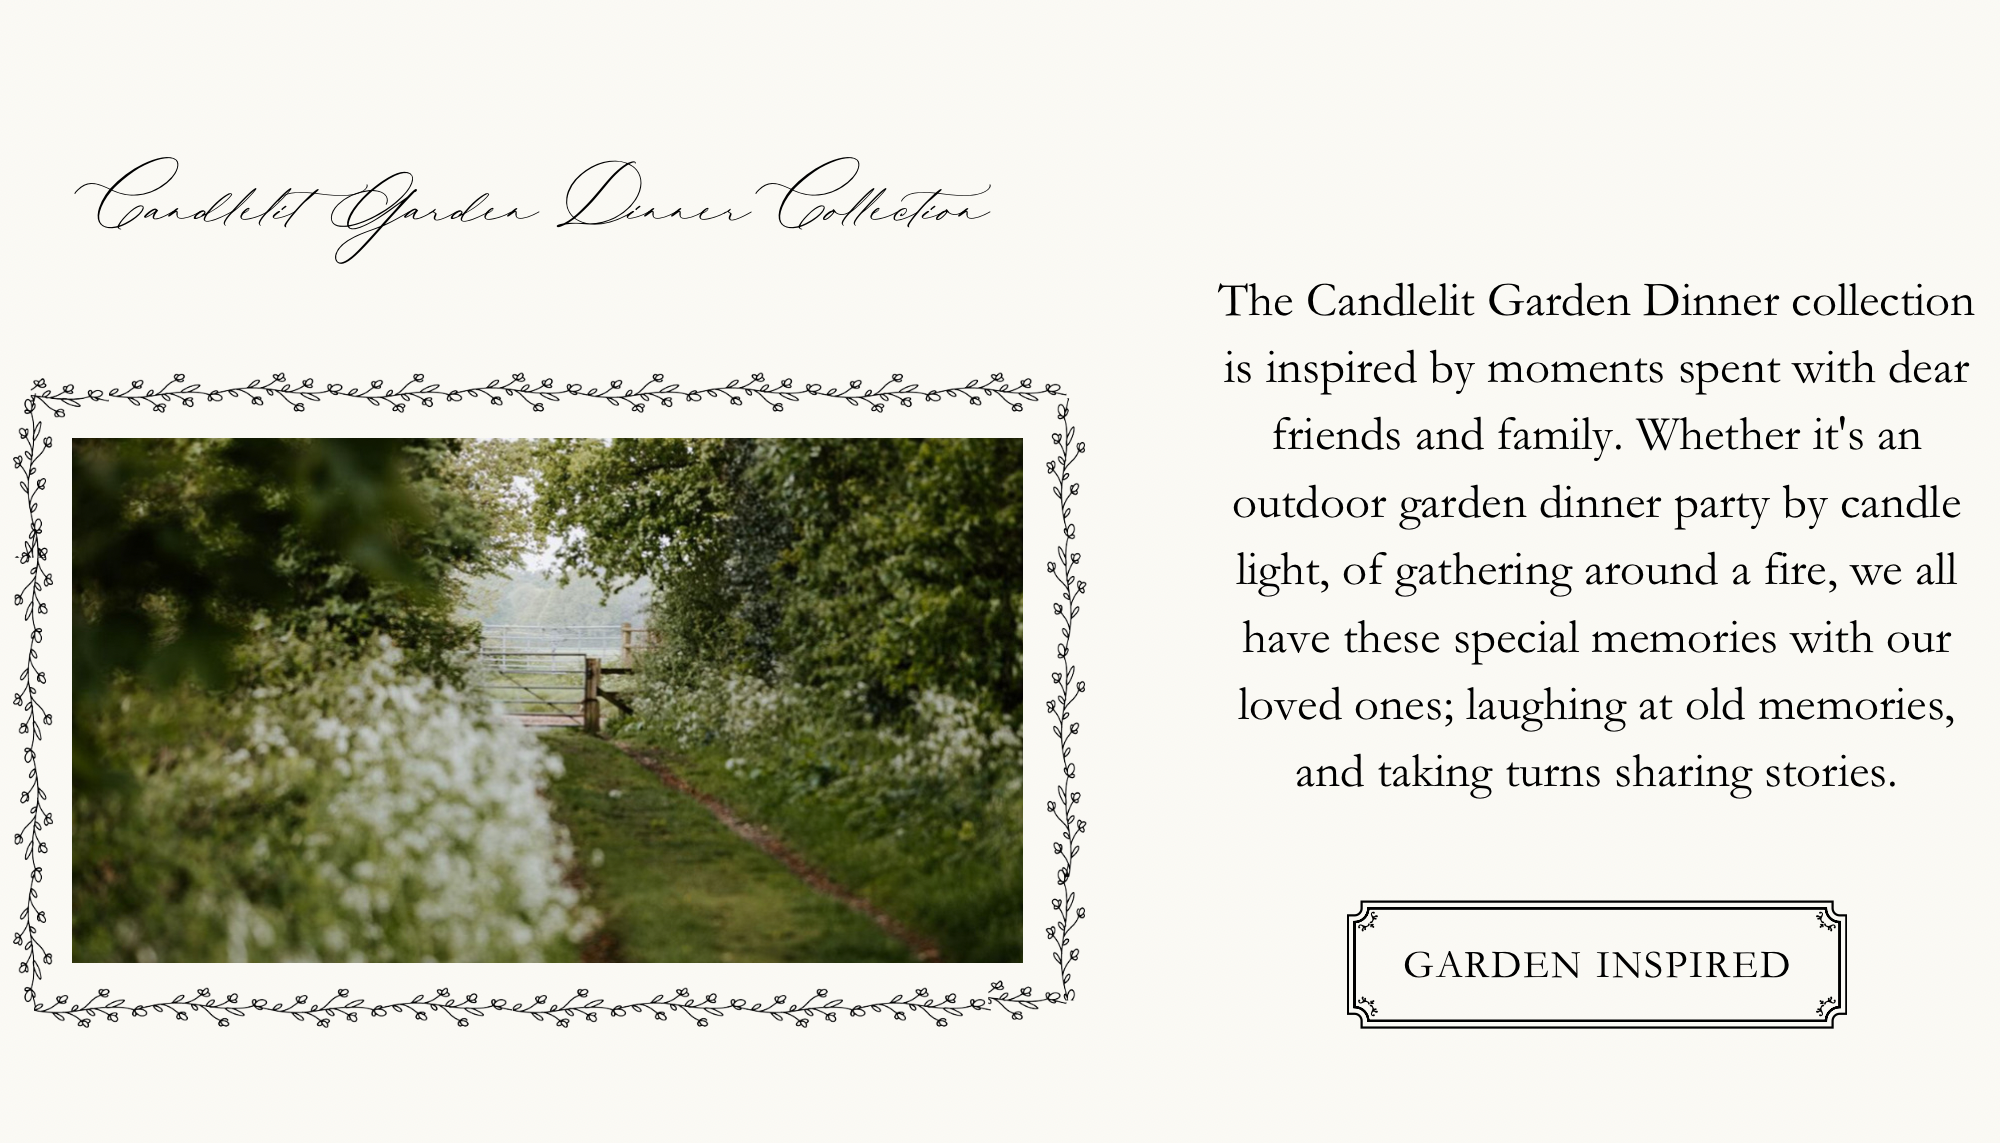 Candlelit Garden Dinner Collection Link